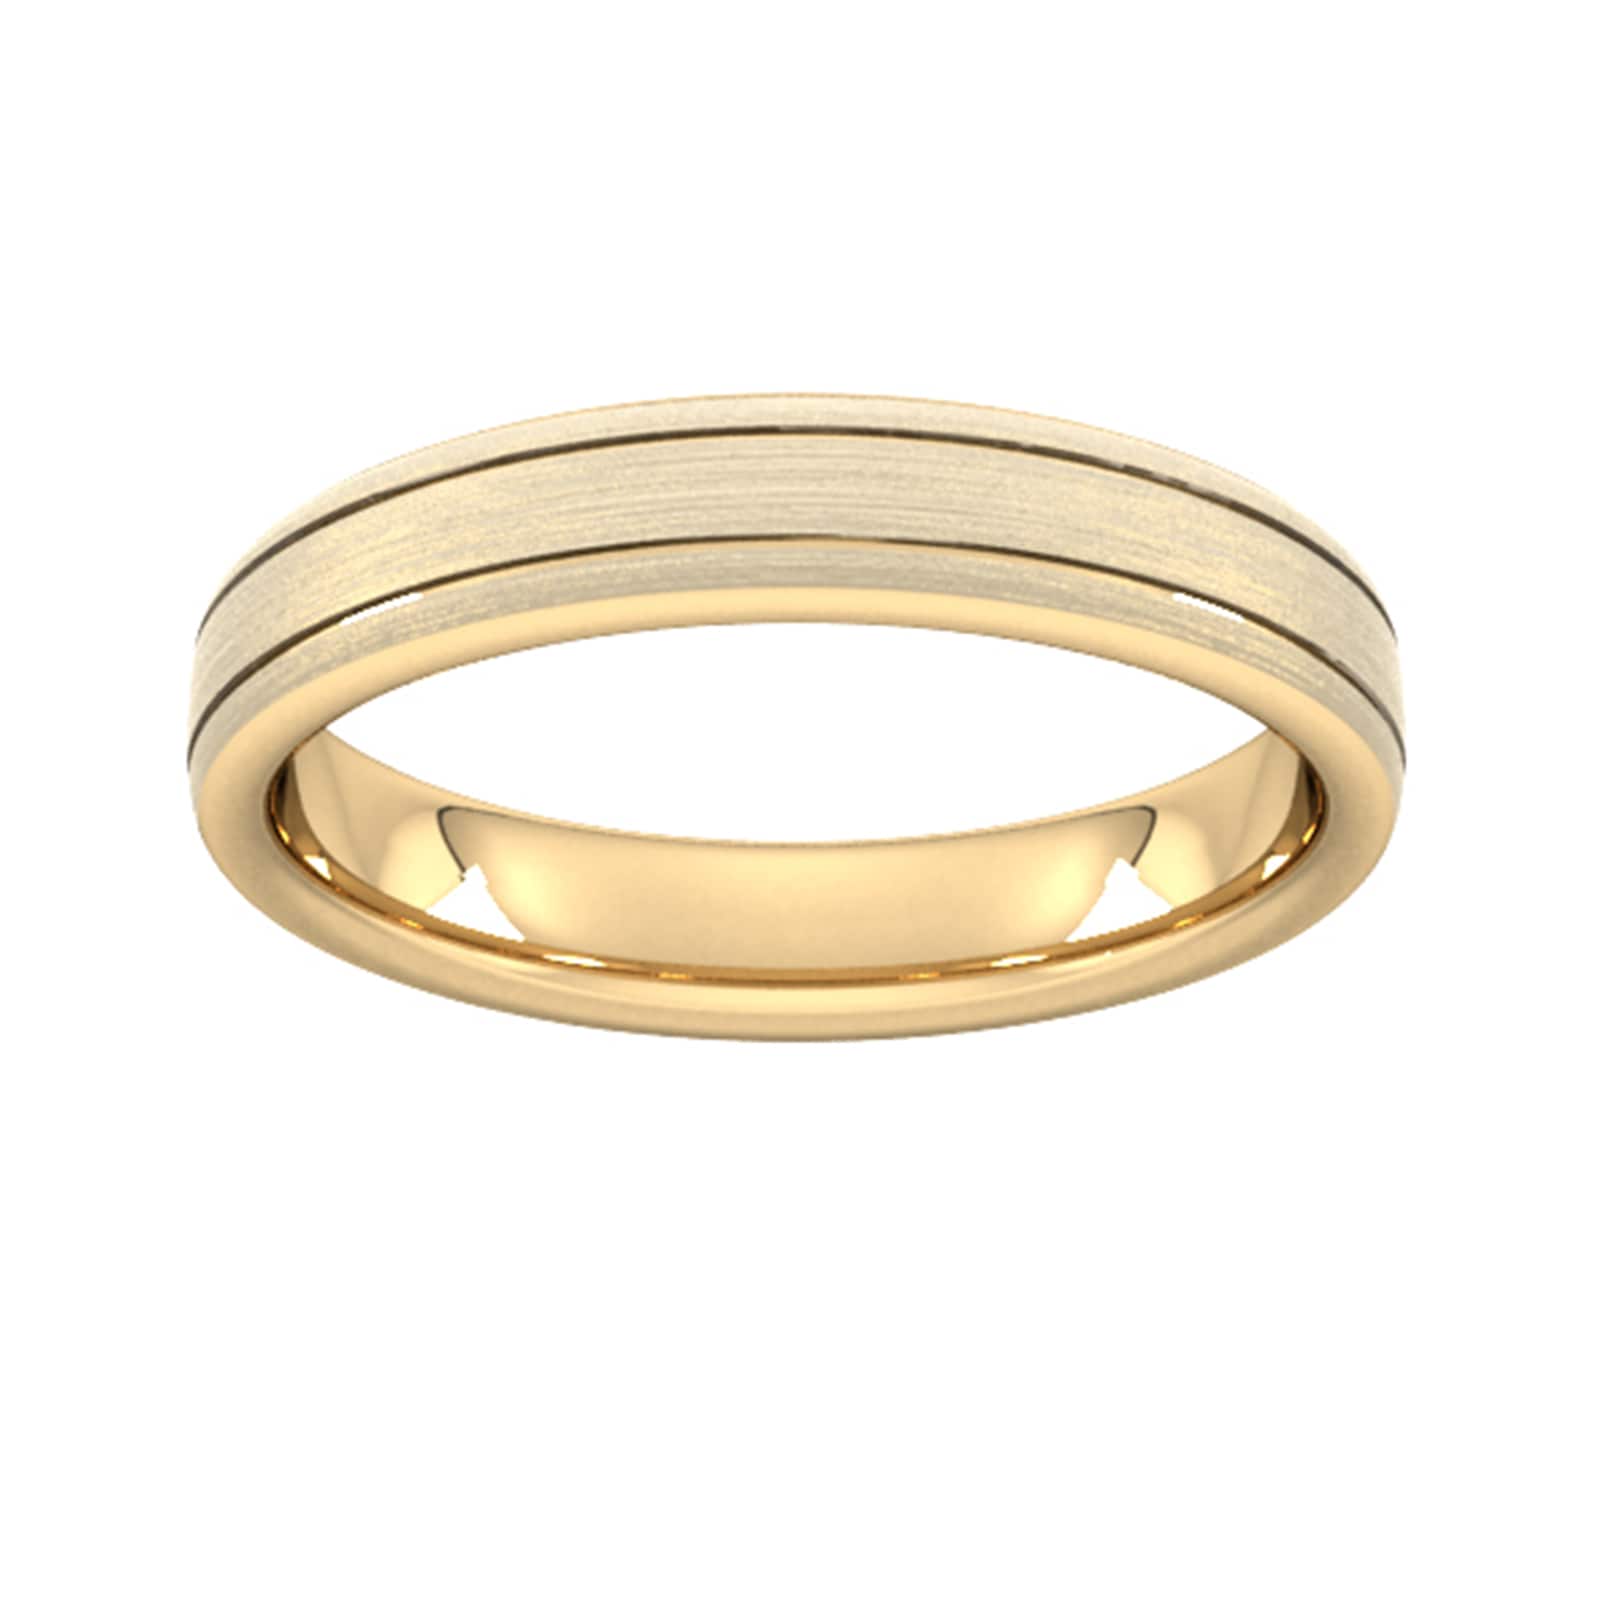 4mm Slight Court Standard Matt Finish With Double Grooves Wedding Ring In 18 Carat Yellow Gold - Ring Size Q